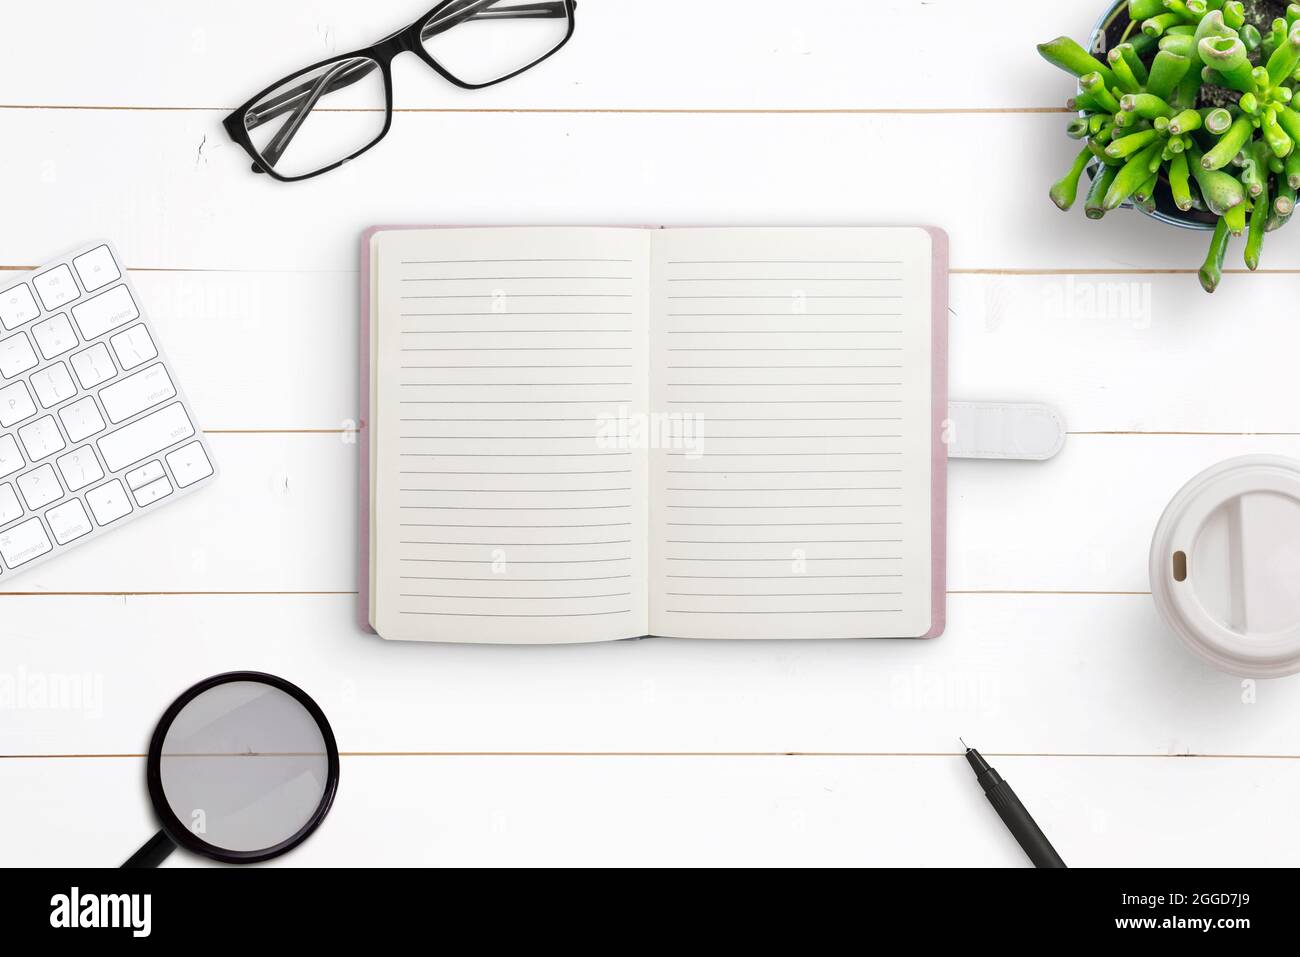 Clean notebook on work desk. Creative flat lay composition on white wooden desk Stock Photo